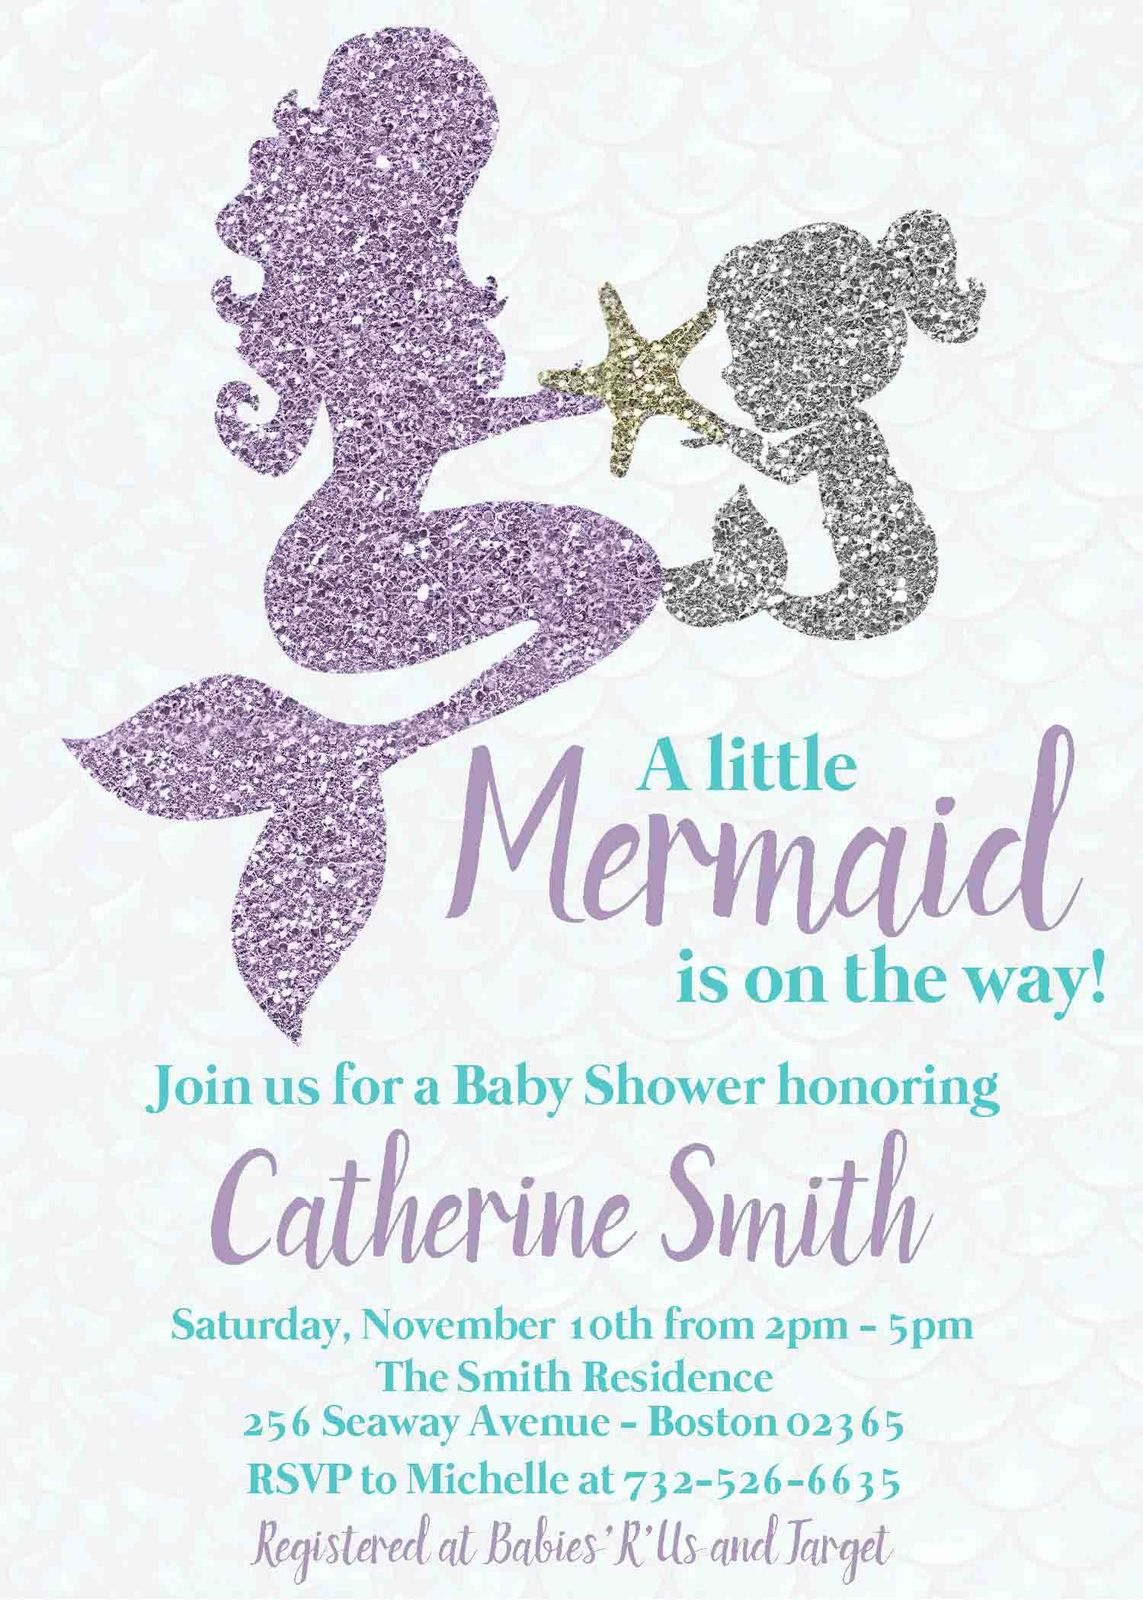 Full Size of Baby Shower:cheap Invitations Baby Shower Homemade Baby Shower Decorations Baby Shower Centerpiece Ideas For Boys Homemade Baby Shower Centerpieces Elegant Baby Shower Nursery For Girls Baby Shower Ideas Baby Shower Invitations For Boys